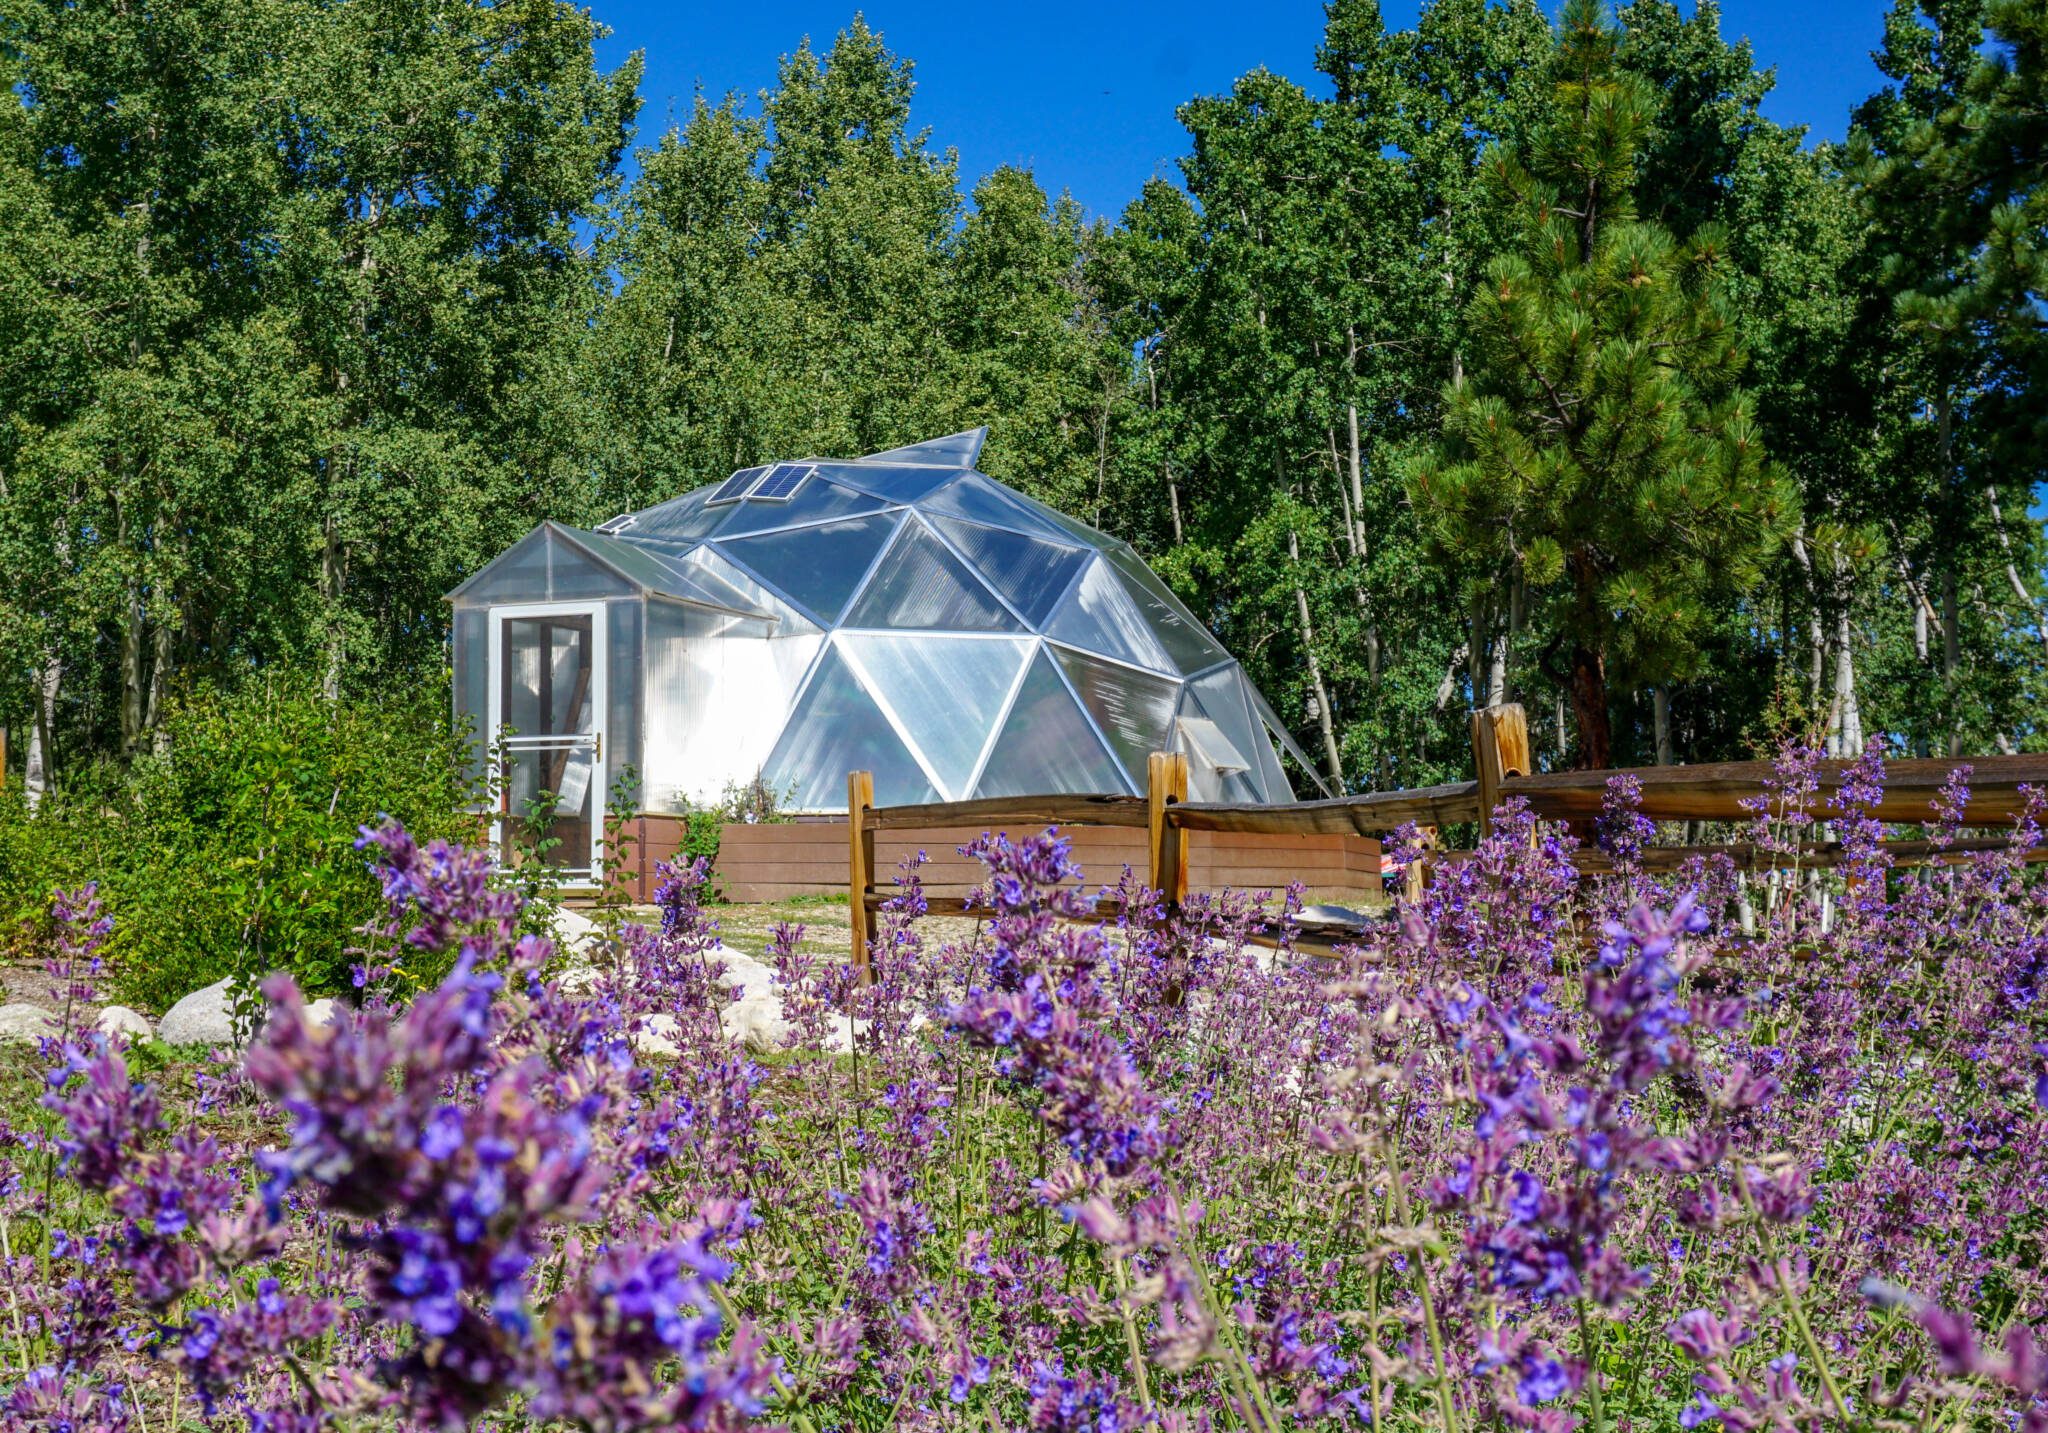 26' Growing Dome Greenhouse in a backyard with purple flowers blooming in the foreground